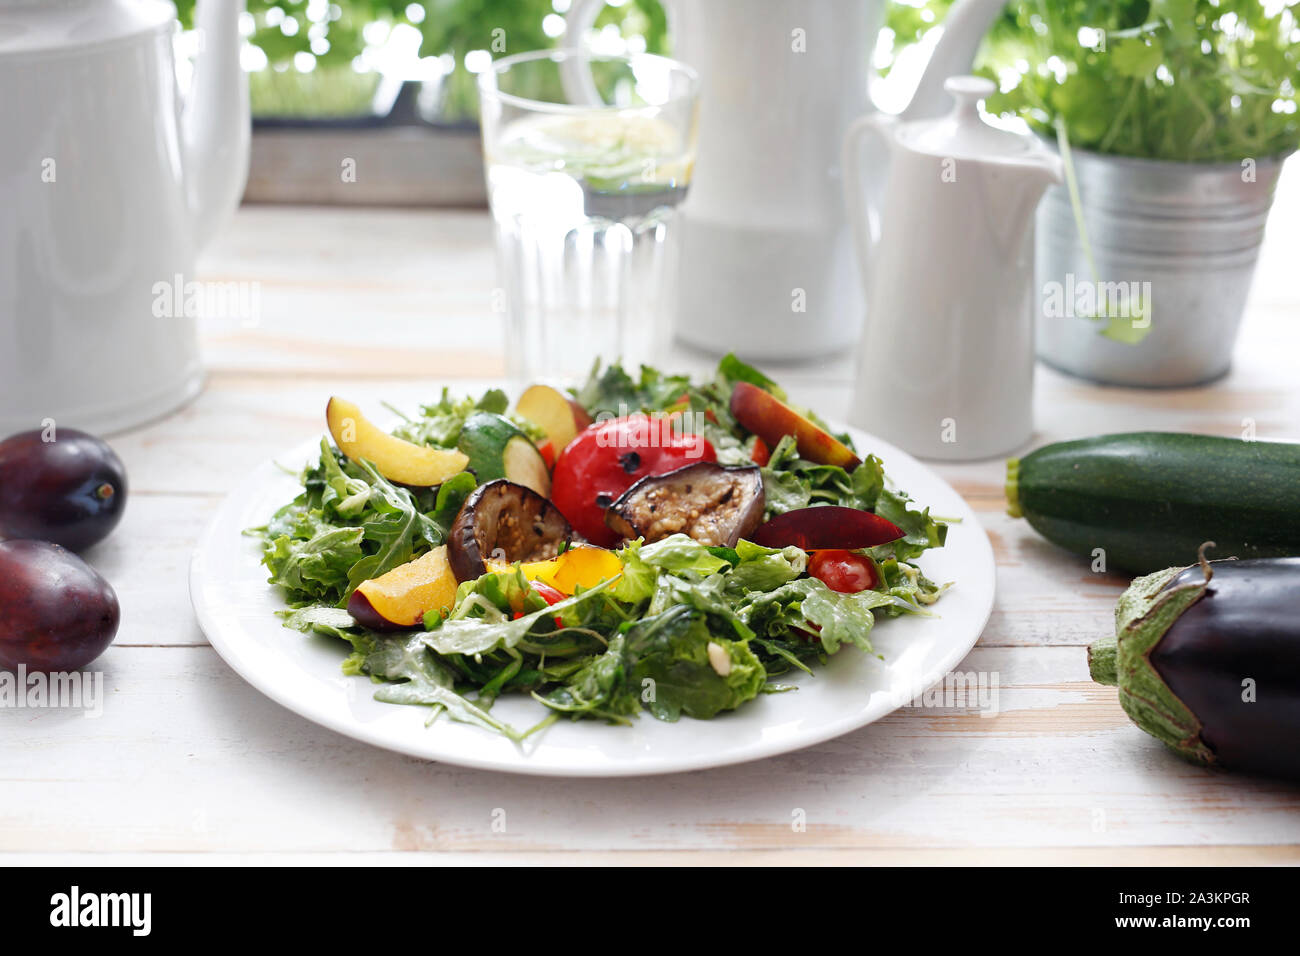 Salad of grilled vegetables on rocket salad with plum, peach and vinaigrette sauce. Stock Photo